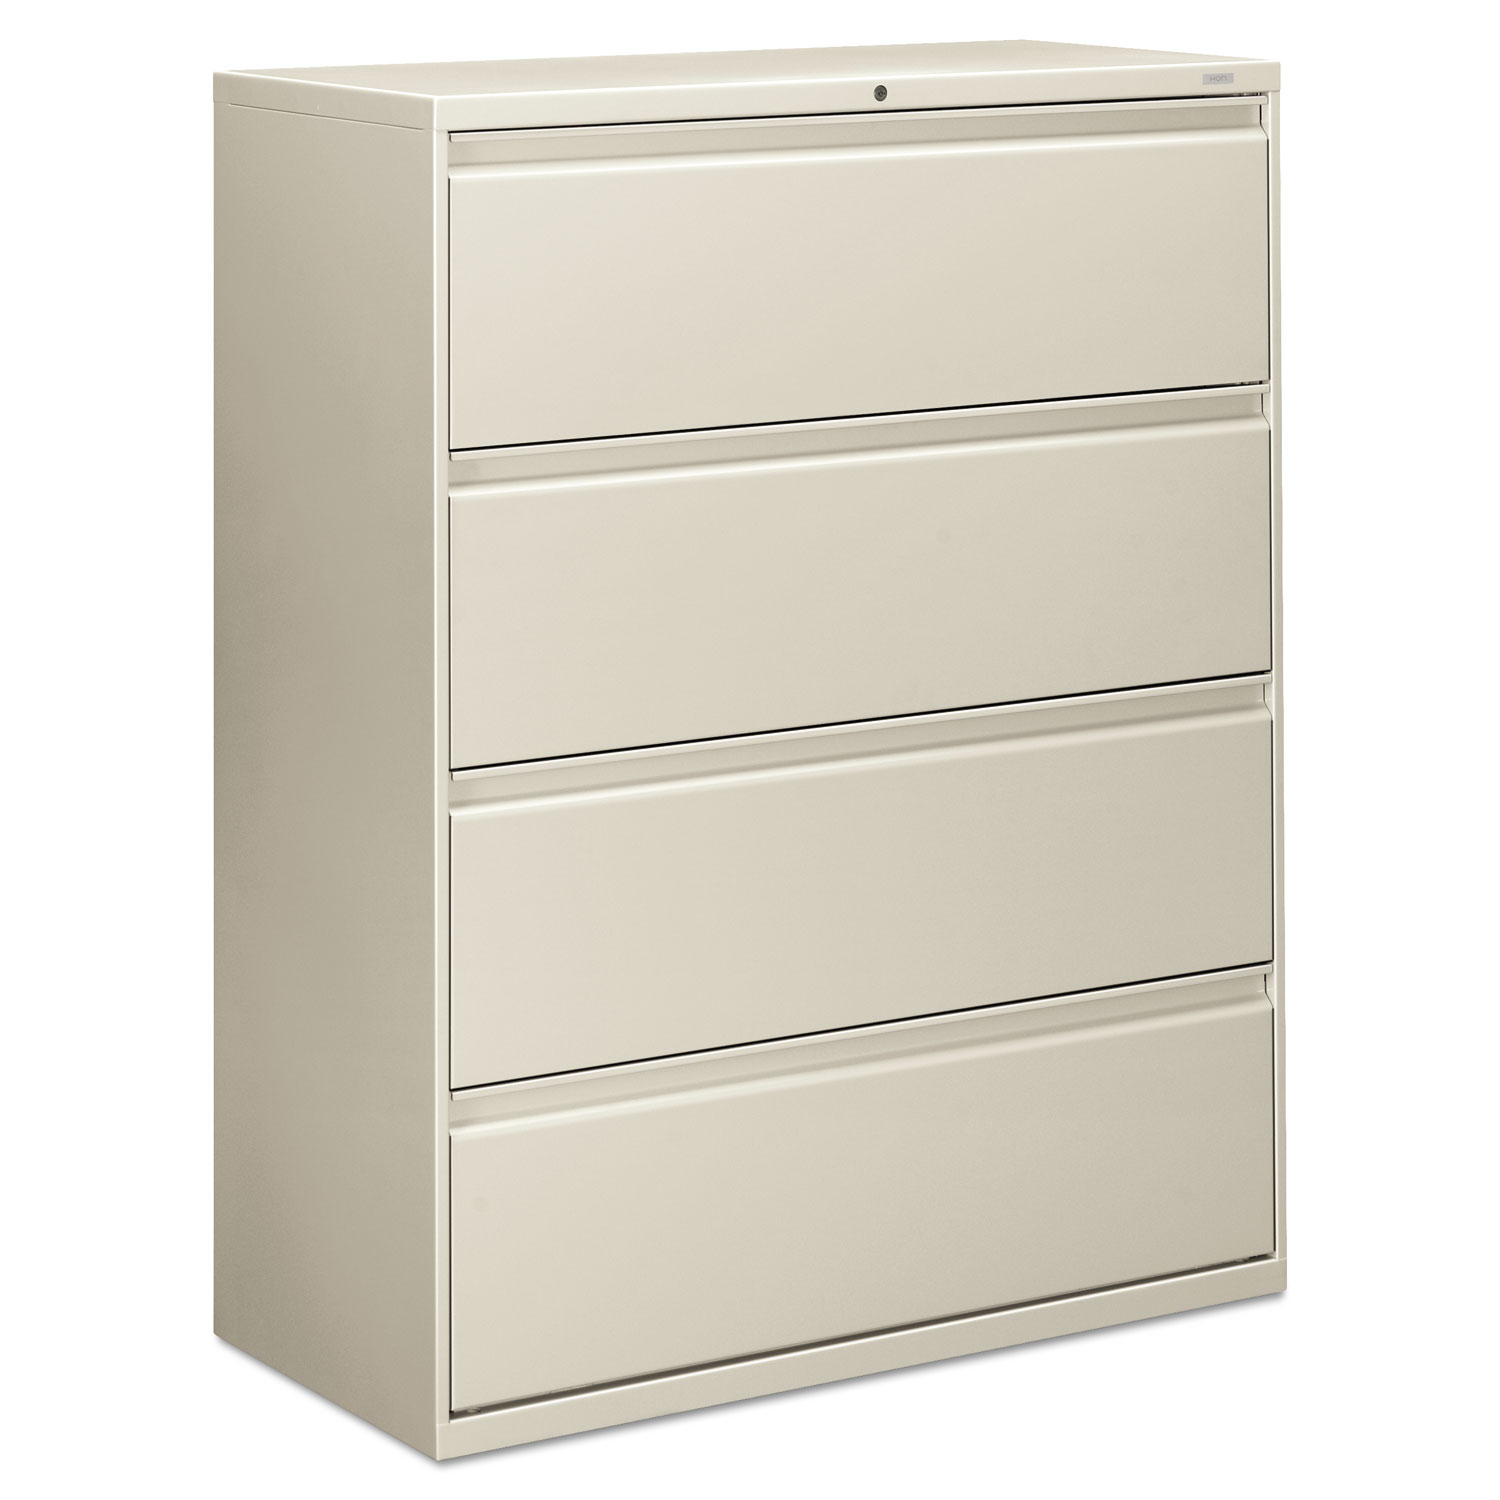 800 Series Four-Drawer Lateral File, 42w x 19-1/4d x 53-1/4h, Light Gray